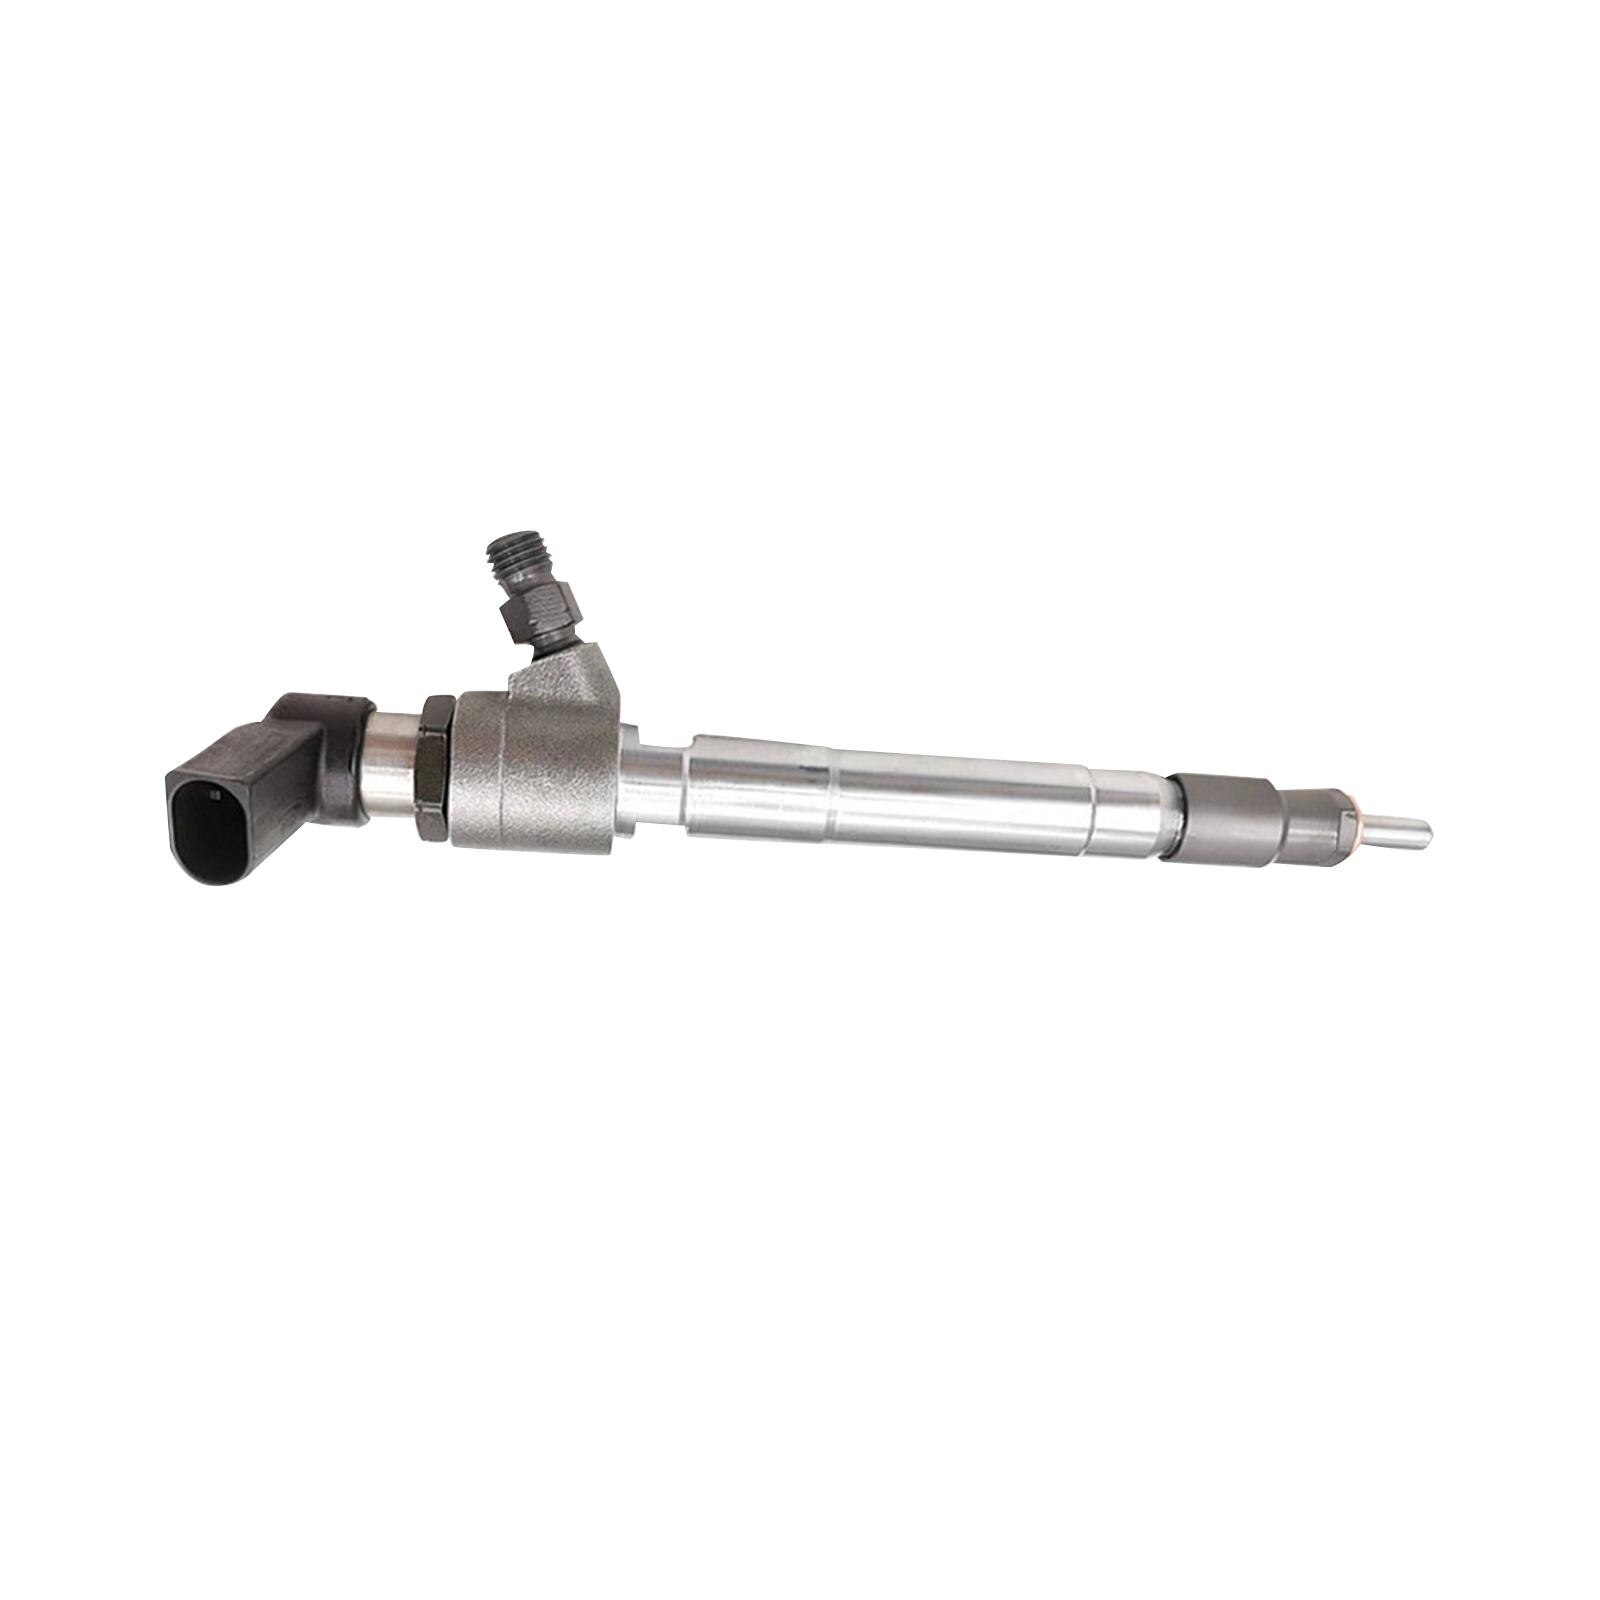 Diesel Fuel Injector Injector, Nozzle Injection, Fuel Injector Nozzle for Relay